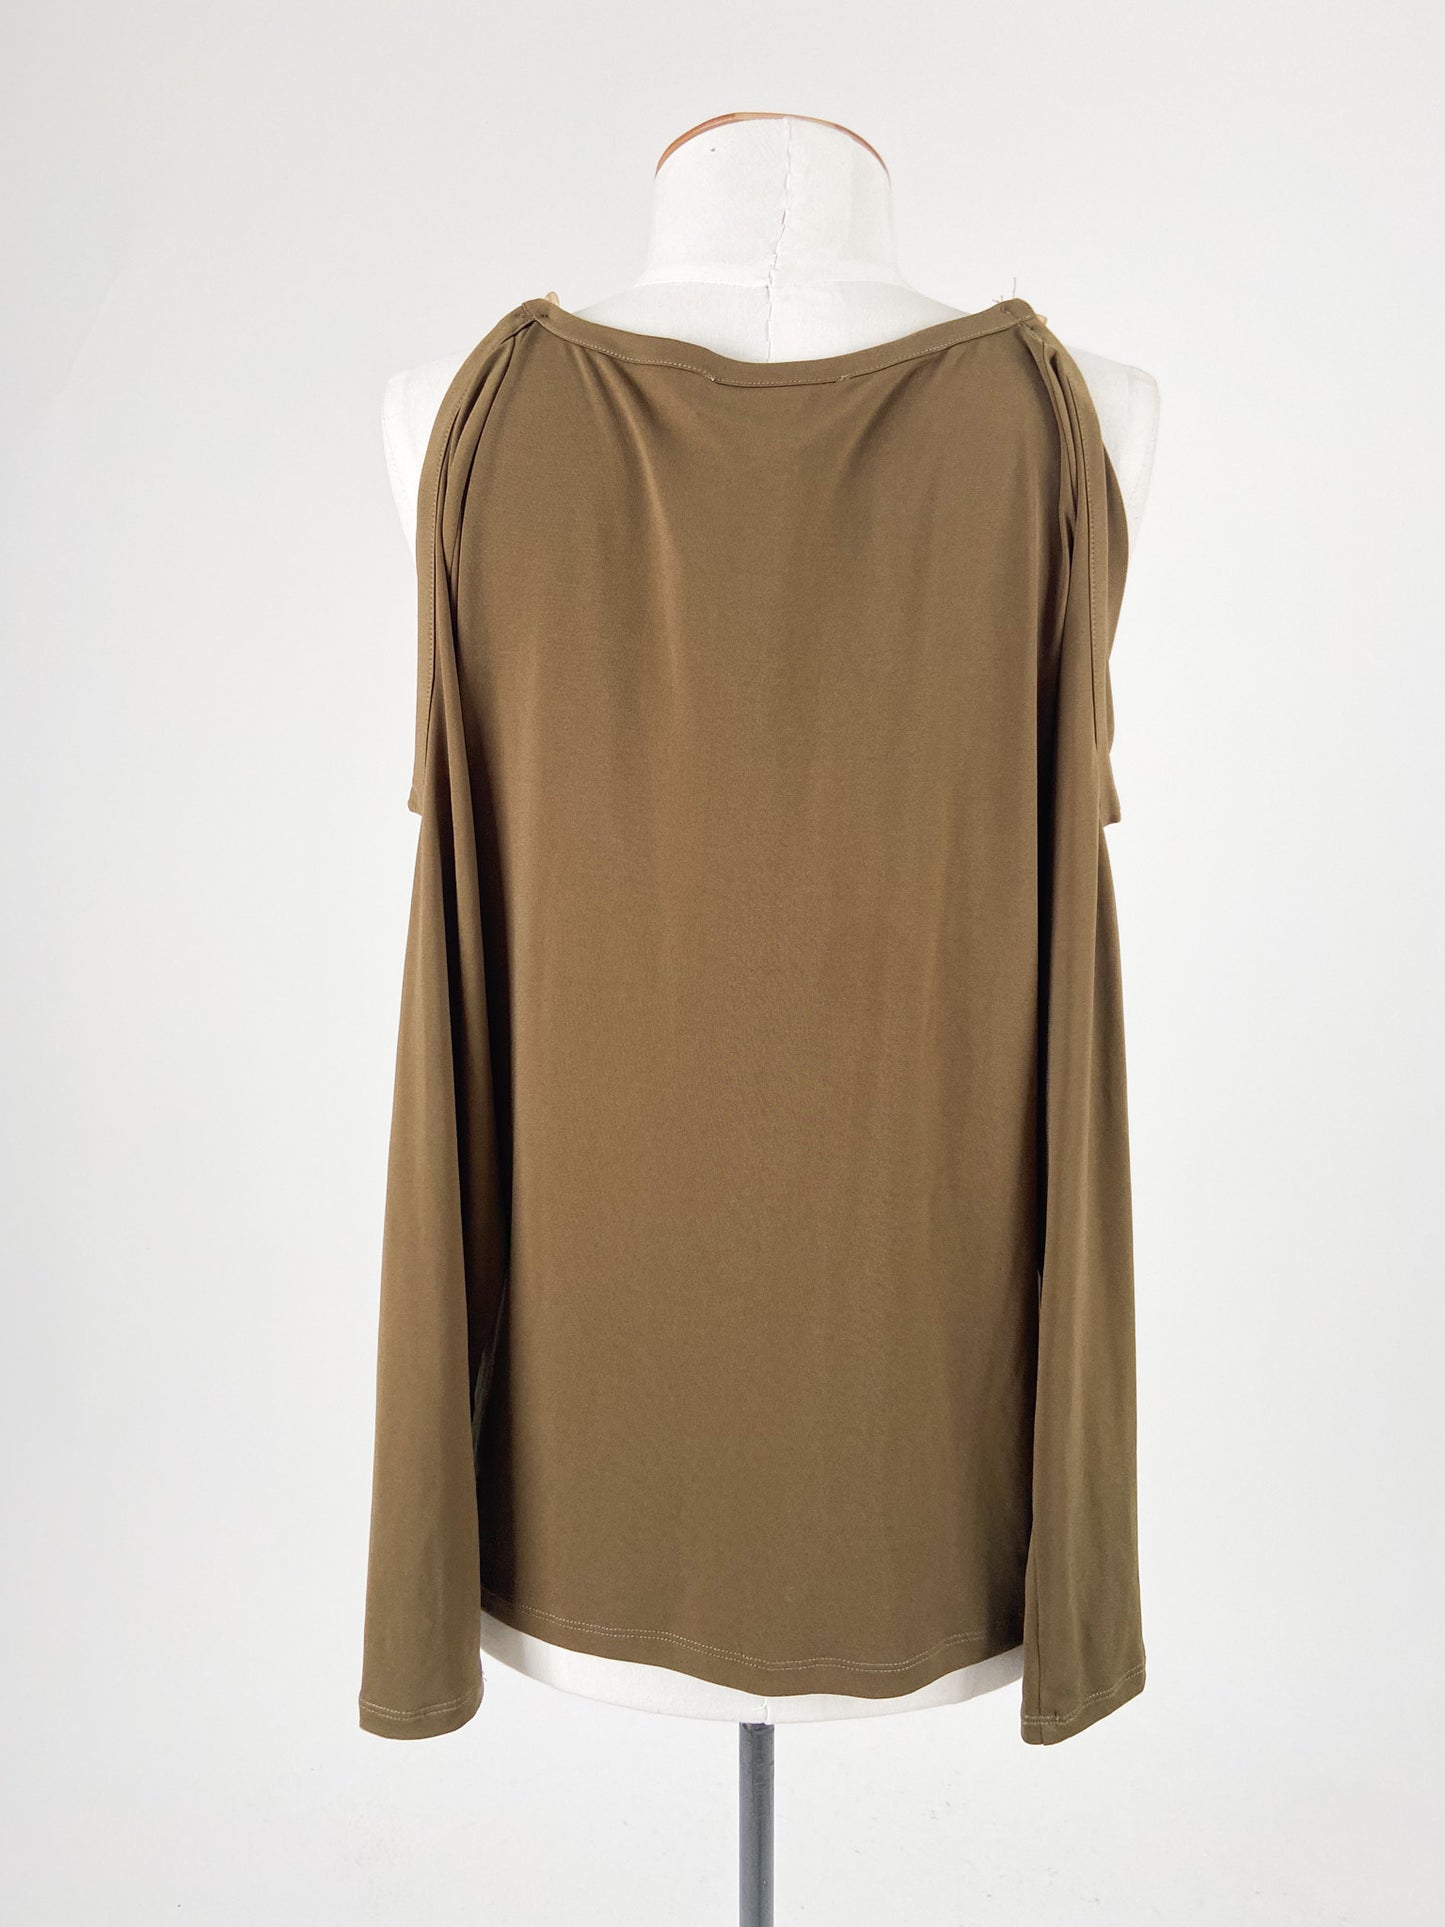 Michael Kors | Green Casual Top | Size S